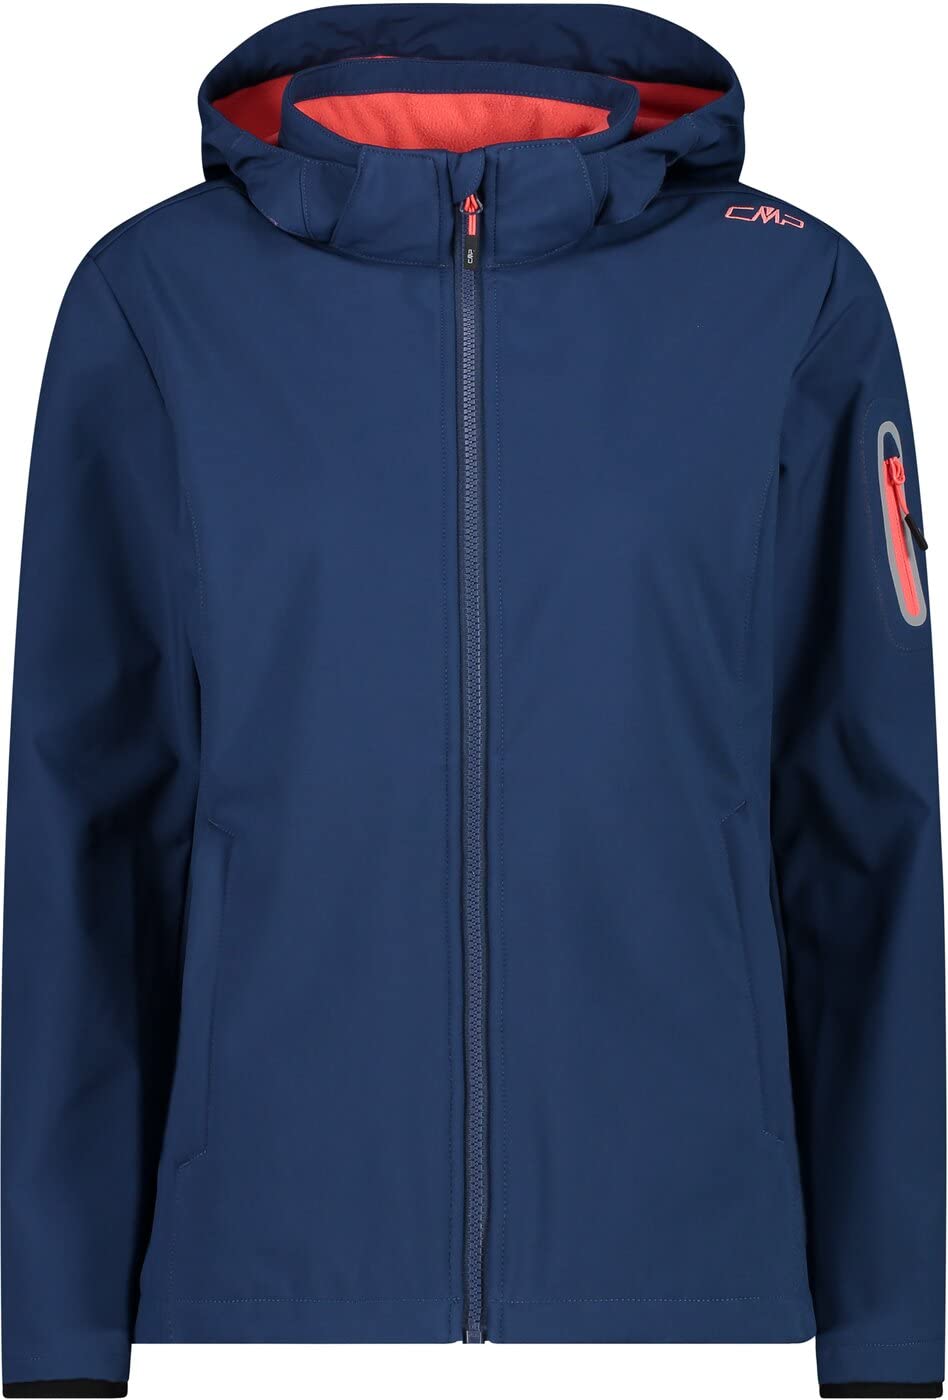 CMP, Windproof and waterproof Softshell jacket WP 7,000, BLUE-RED KISS, D44, Blau-Rot Kiss